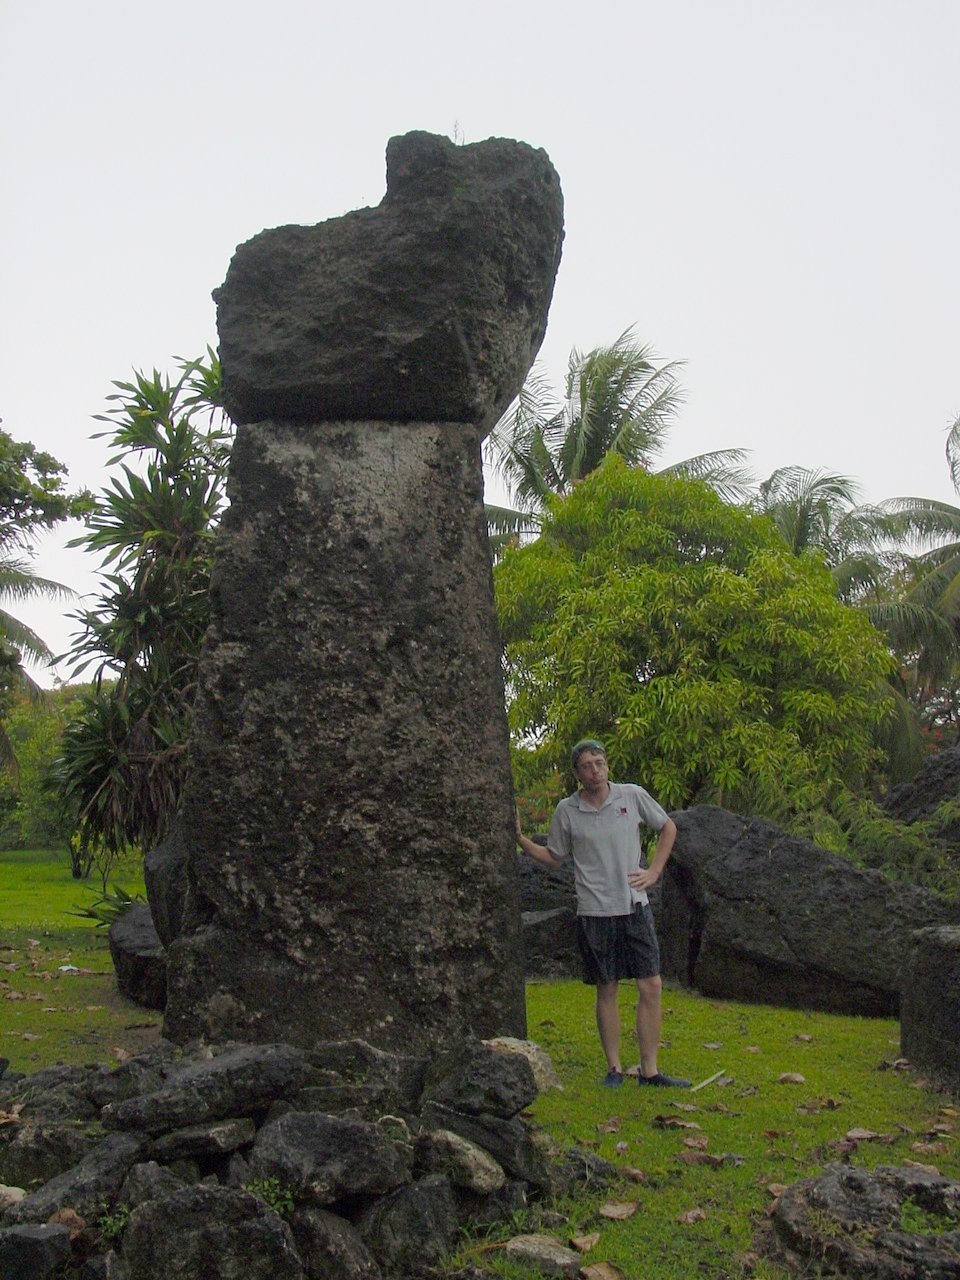 The largest known erected latte, at the site legend states was the house of Chief Taga, in Tinian, Northern Mariana Islands. Photo taken on August 21, 2002.